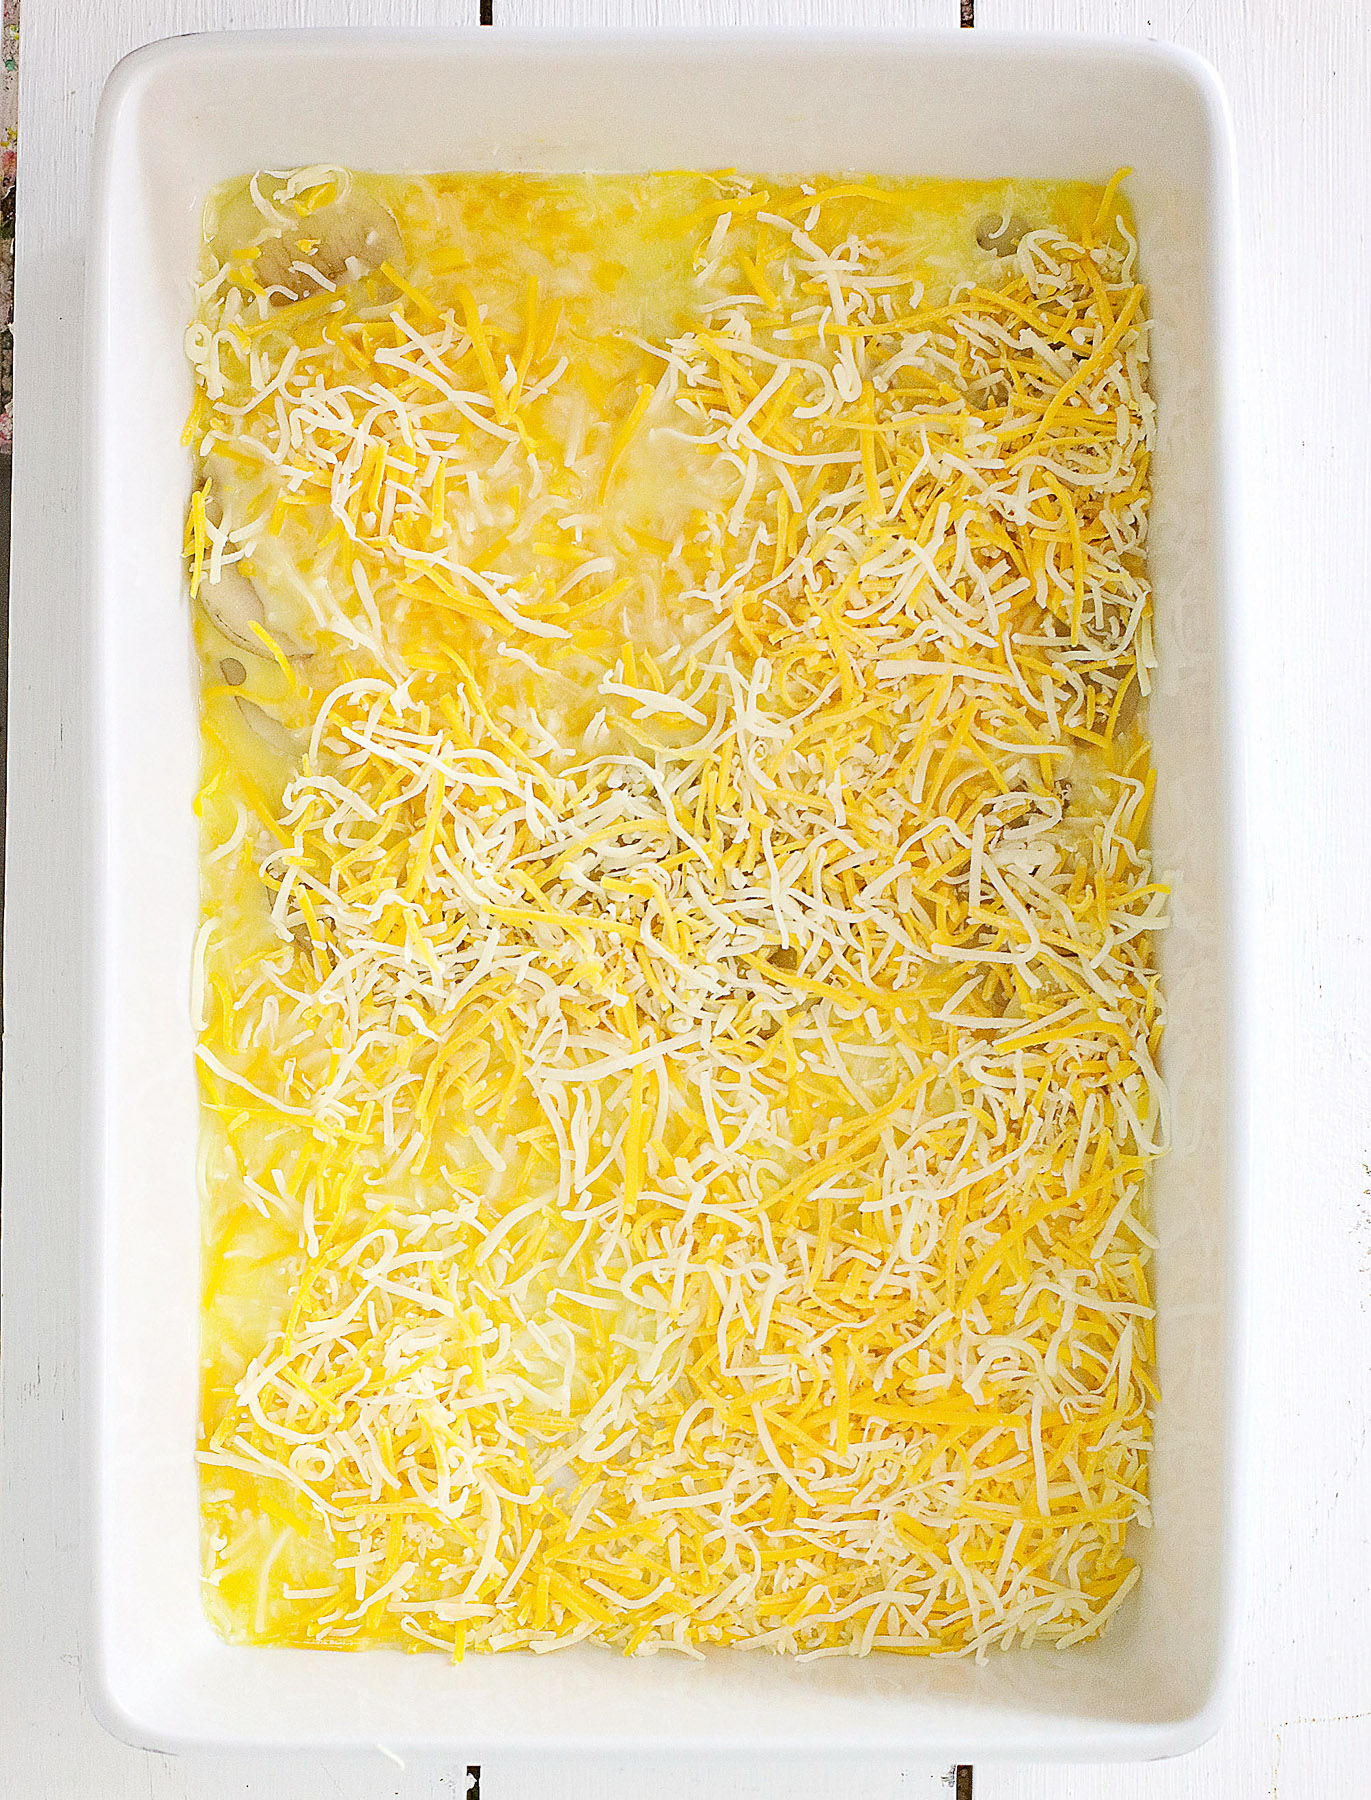 shredded cheese over scalloped potatoes casserole ready to go into the oven